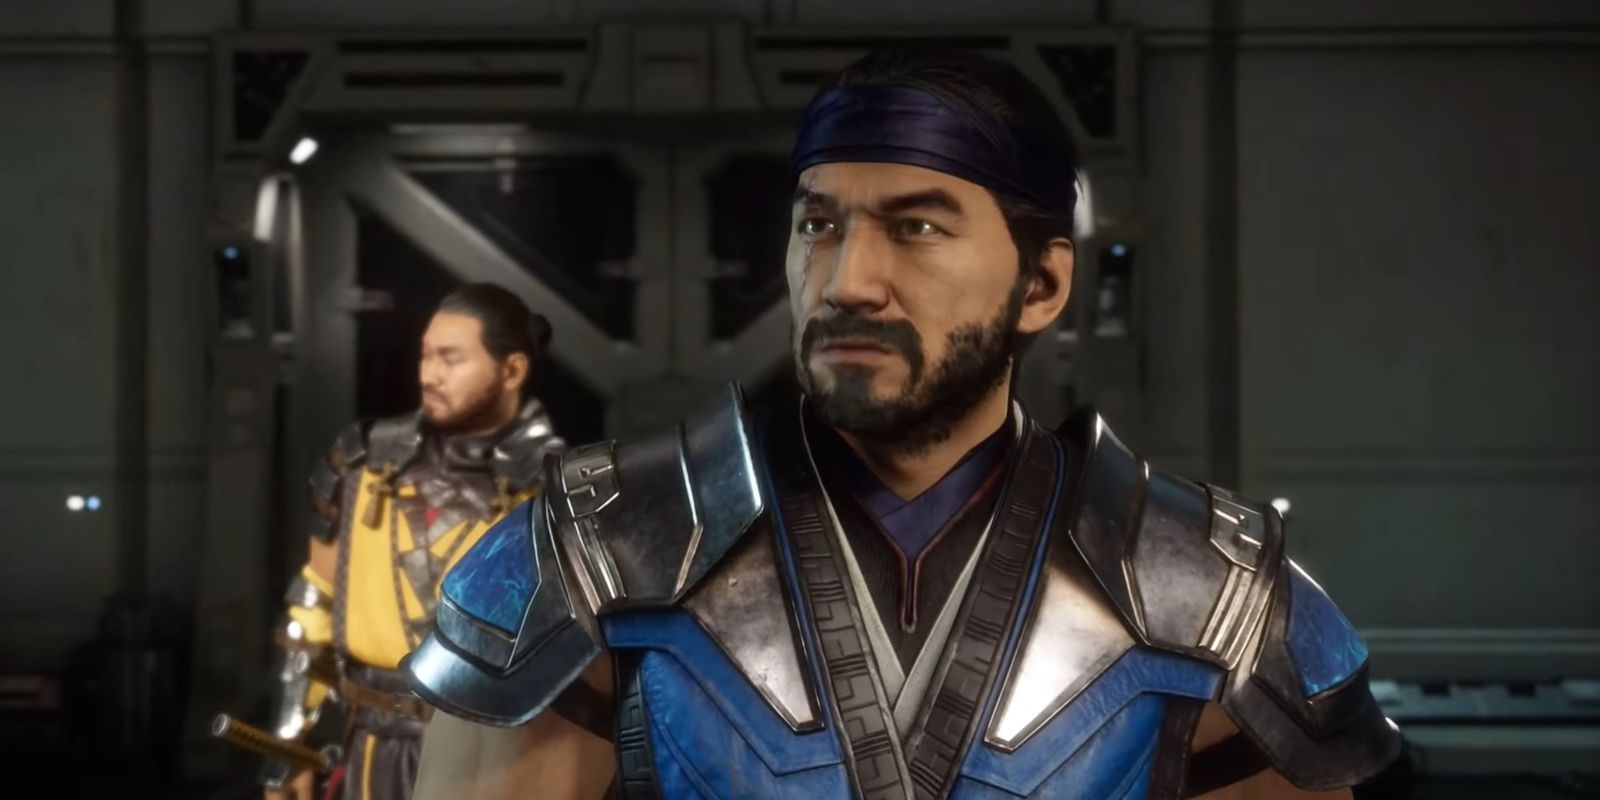 Sub-Zero and Scorpion in the Cyber Lin Kuei assembly in Mortal Kombat 11